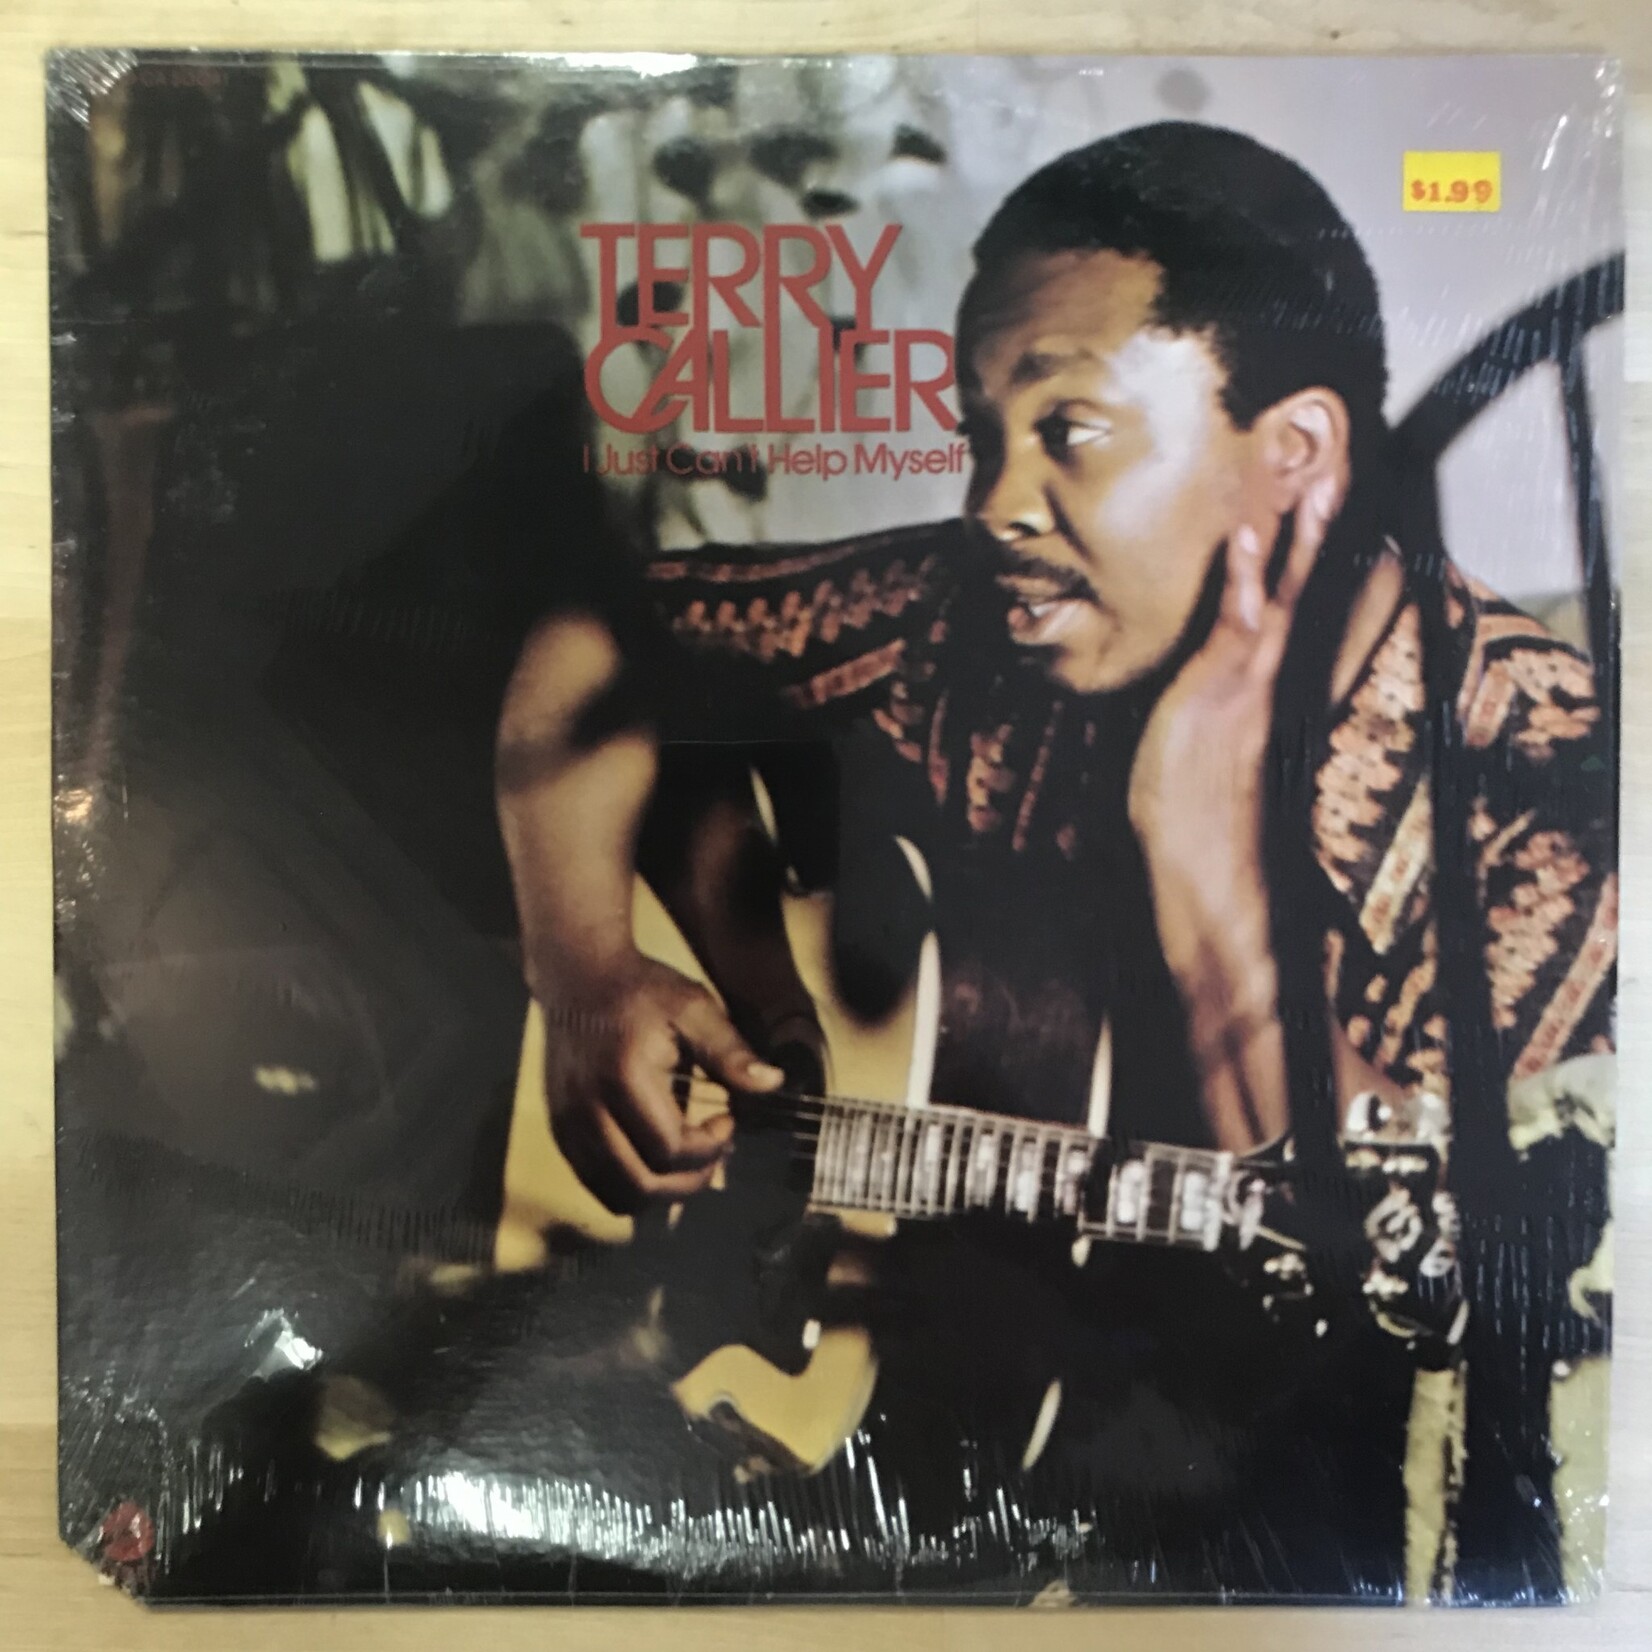 Terry Callier - I Just Can’t Help Myself - CA50041 - Vinyl LP (USED)